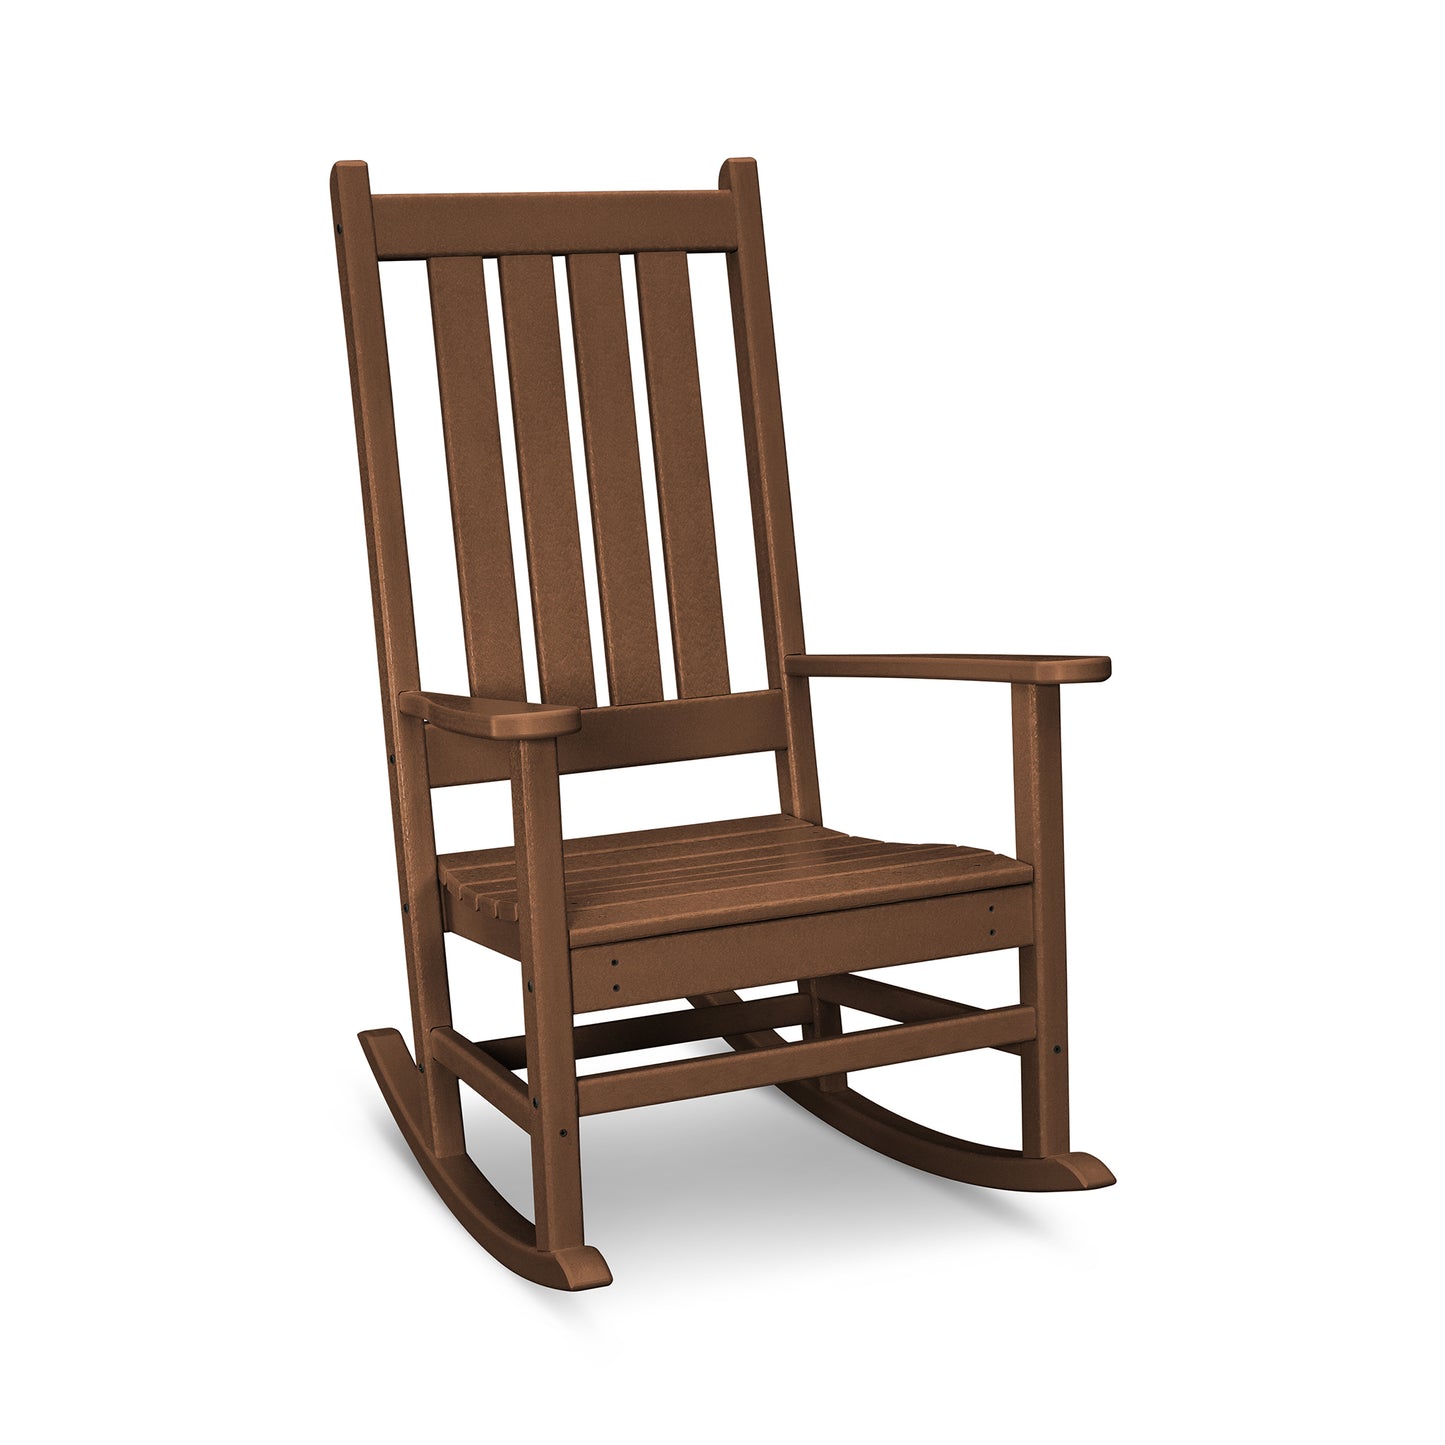 A brown POLYWOOD® Vineyard Porch Rocking Chair with a slatted back and seat, armrests, and curved rockers, isolated on a white background.